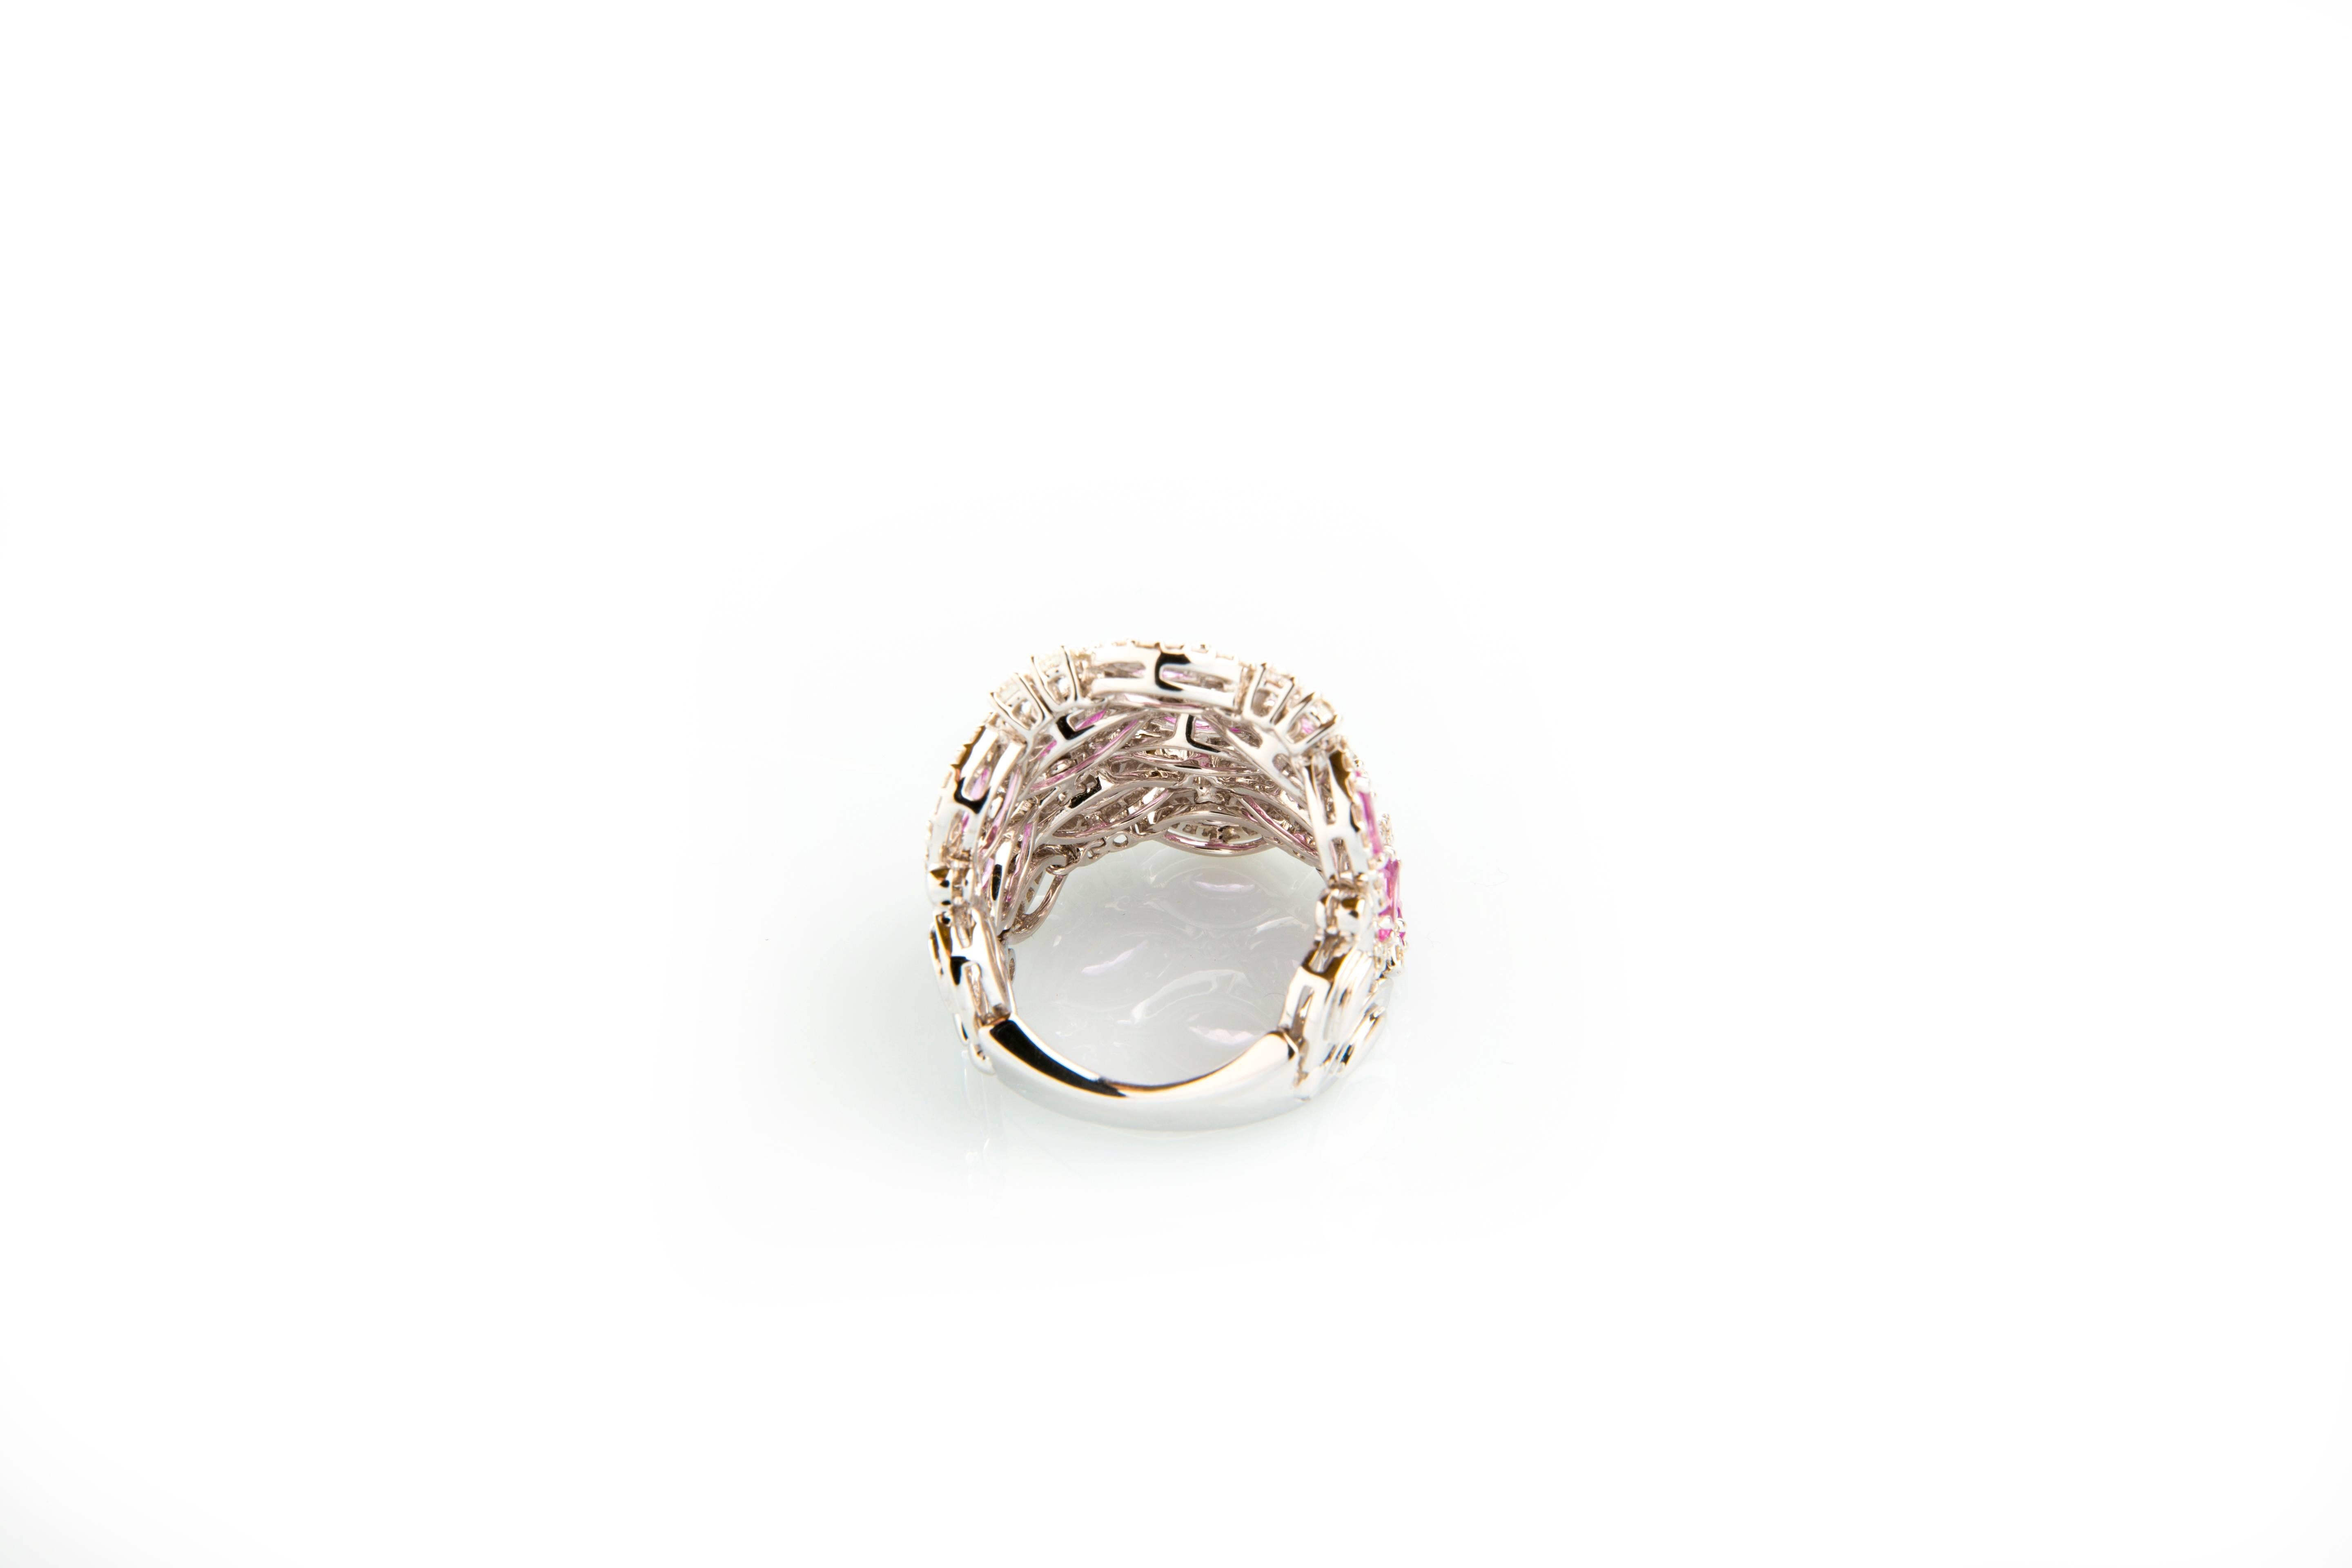 Part of Knauf Jewel Diamonds collection, a luxury edition that comprises the most precious stones featuring diamonds 2,1 carat and pink sapphires 2,94 carat.
Lovingly crafted in white gold 18 Karat, its flexibility allows to adjust smoothly around